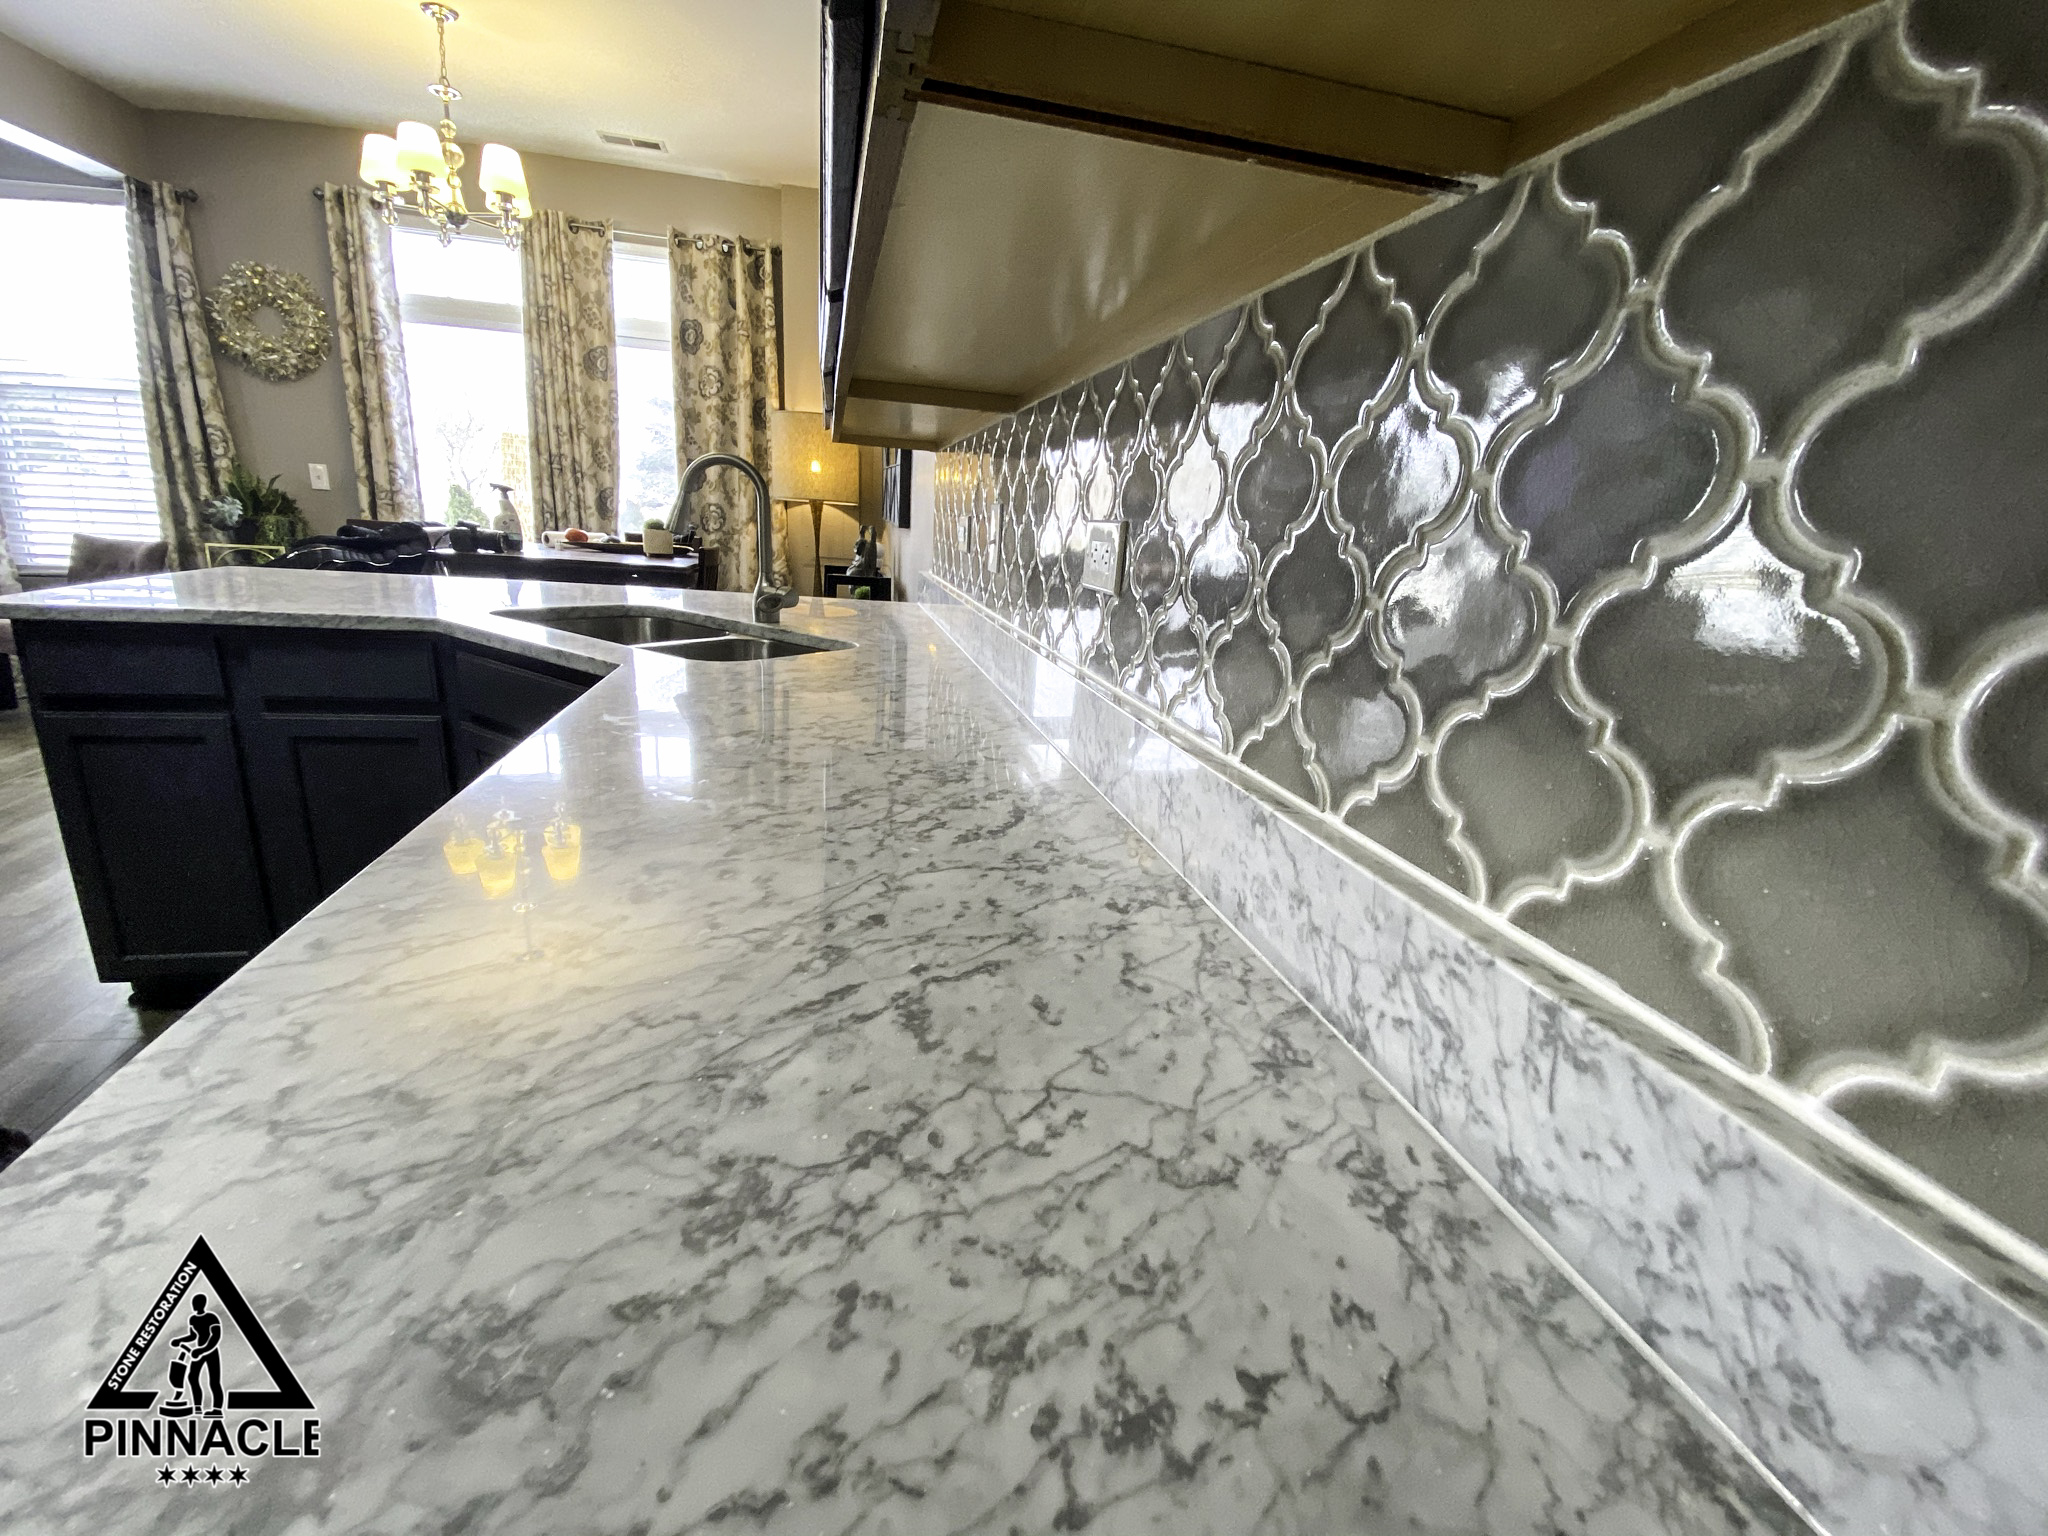 How to take care of white marble countertop? – Maintenance and restoration tips